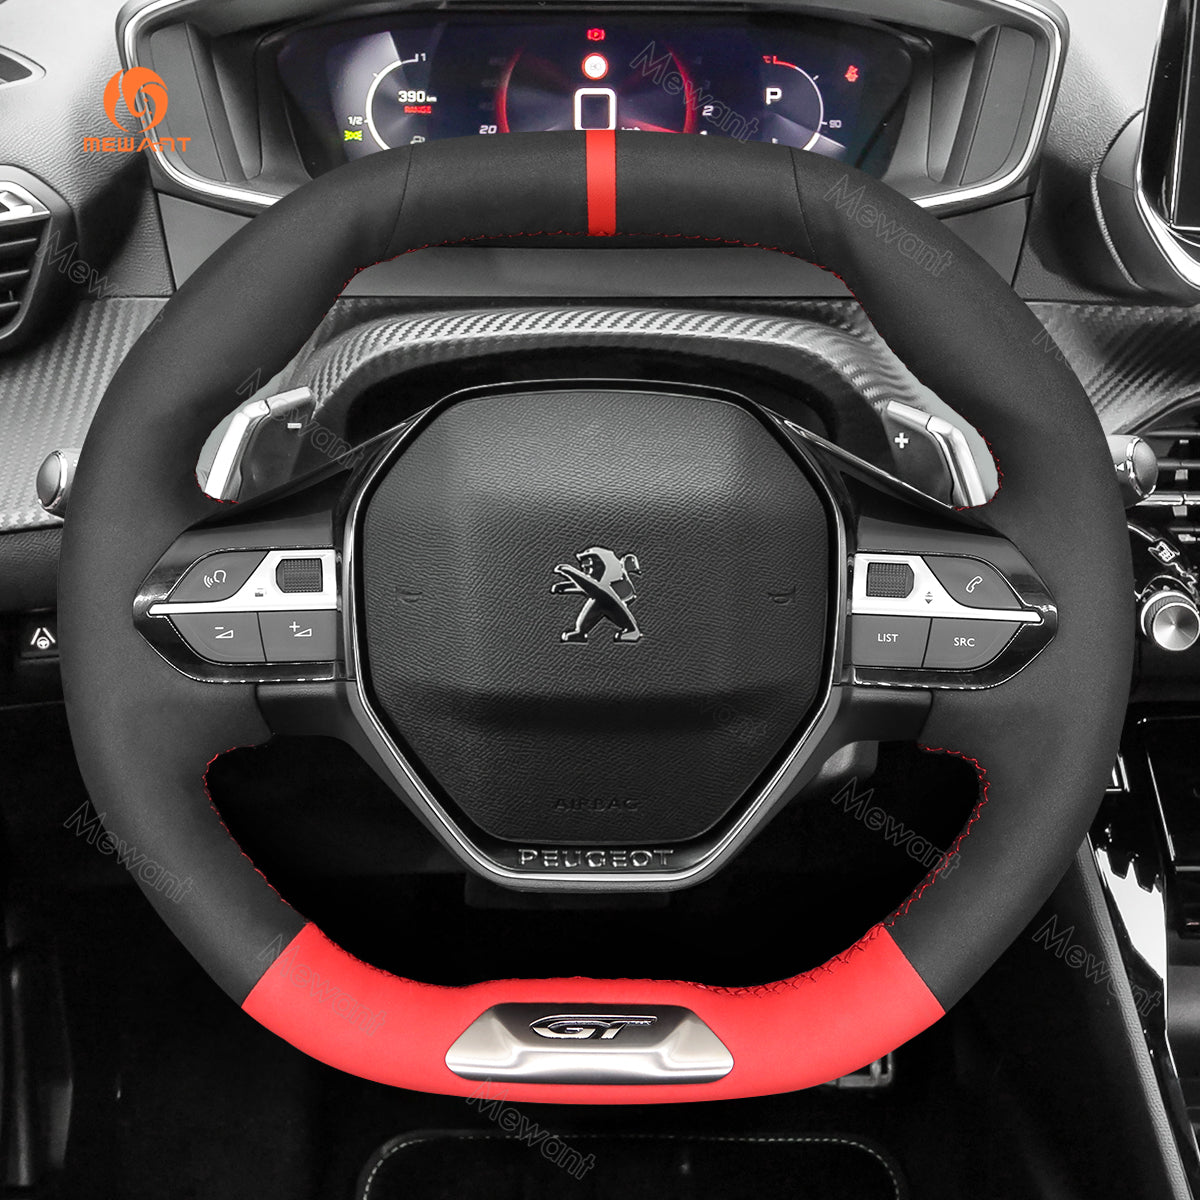 MEWANT Hand Stitch Car Steering Wheel Cover for Peugeot 208 308 SW 2008 3008 508 SW 5008 Rifter (GT/GT Line)